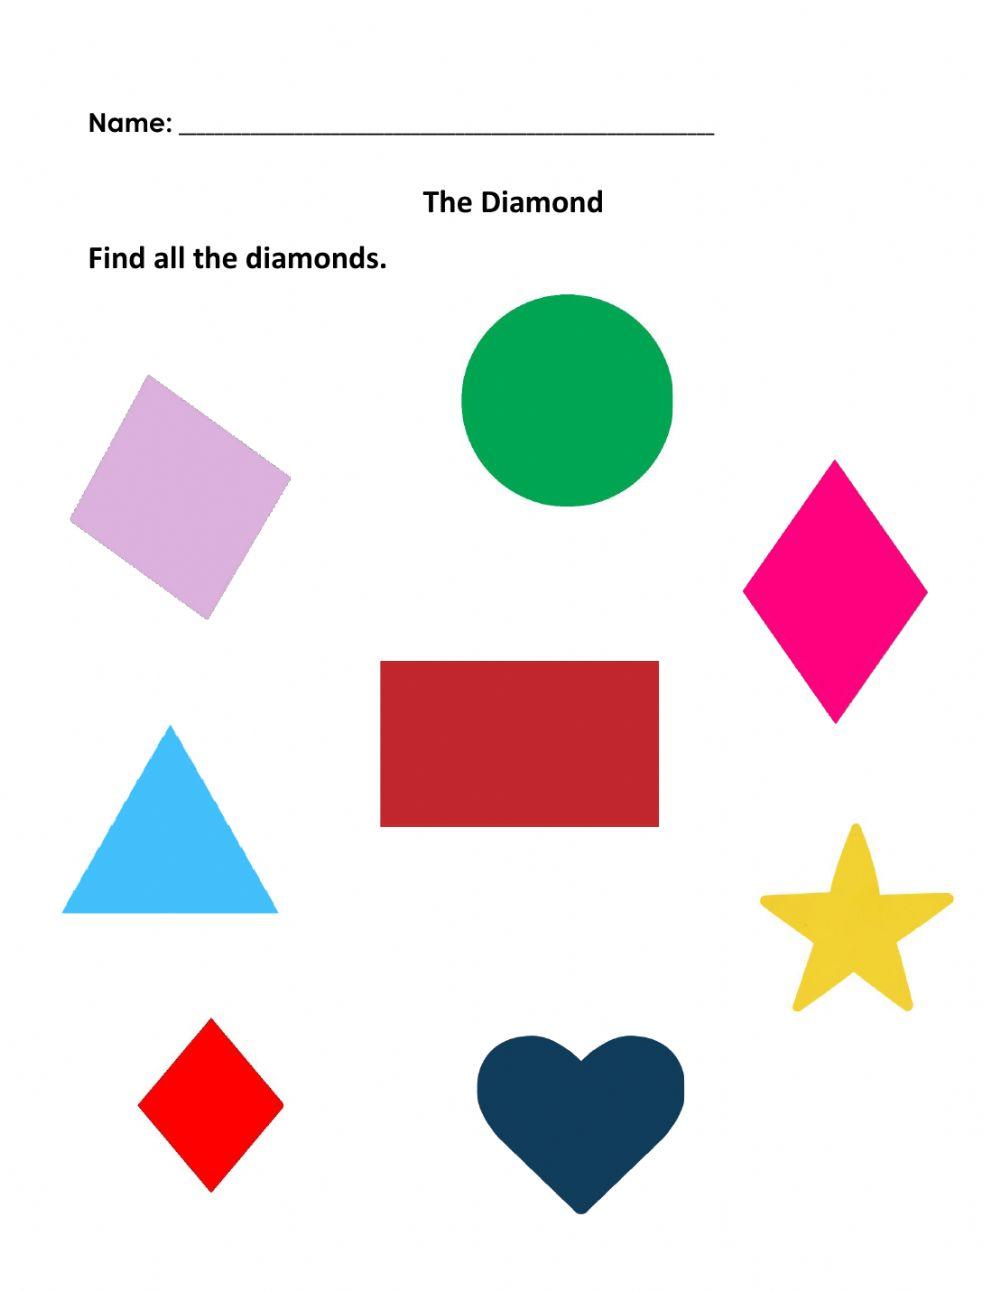 Find All The Diamonds